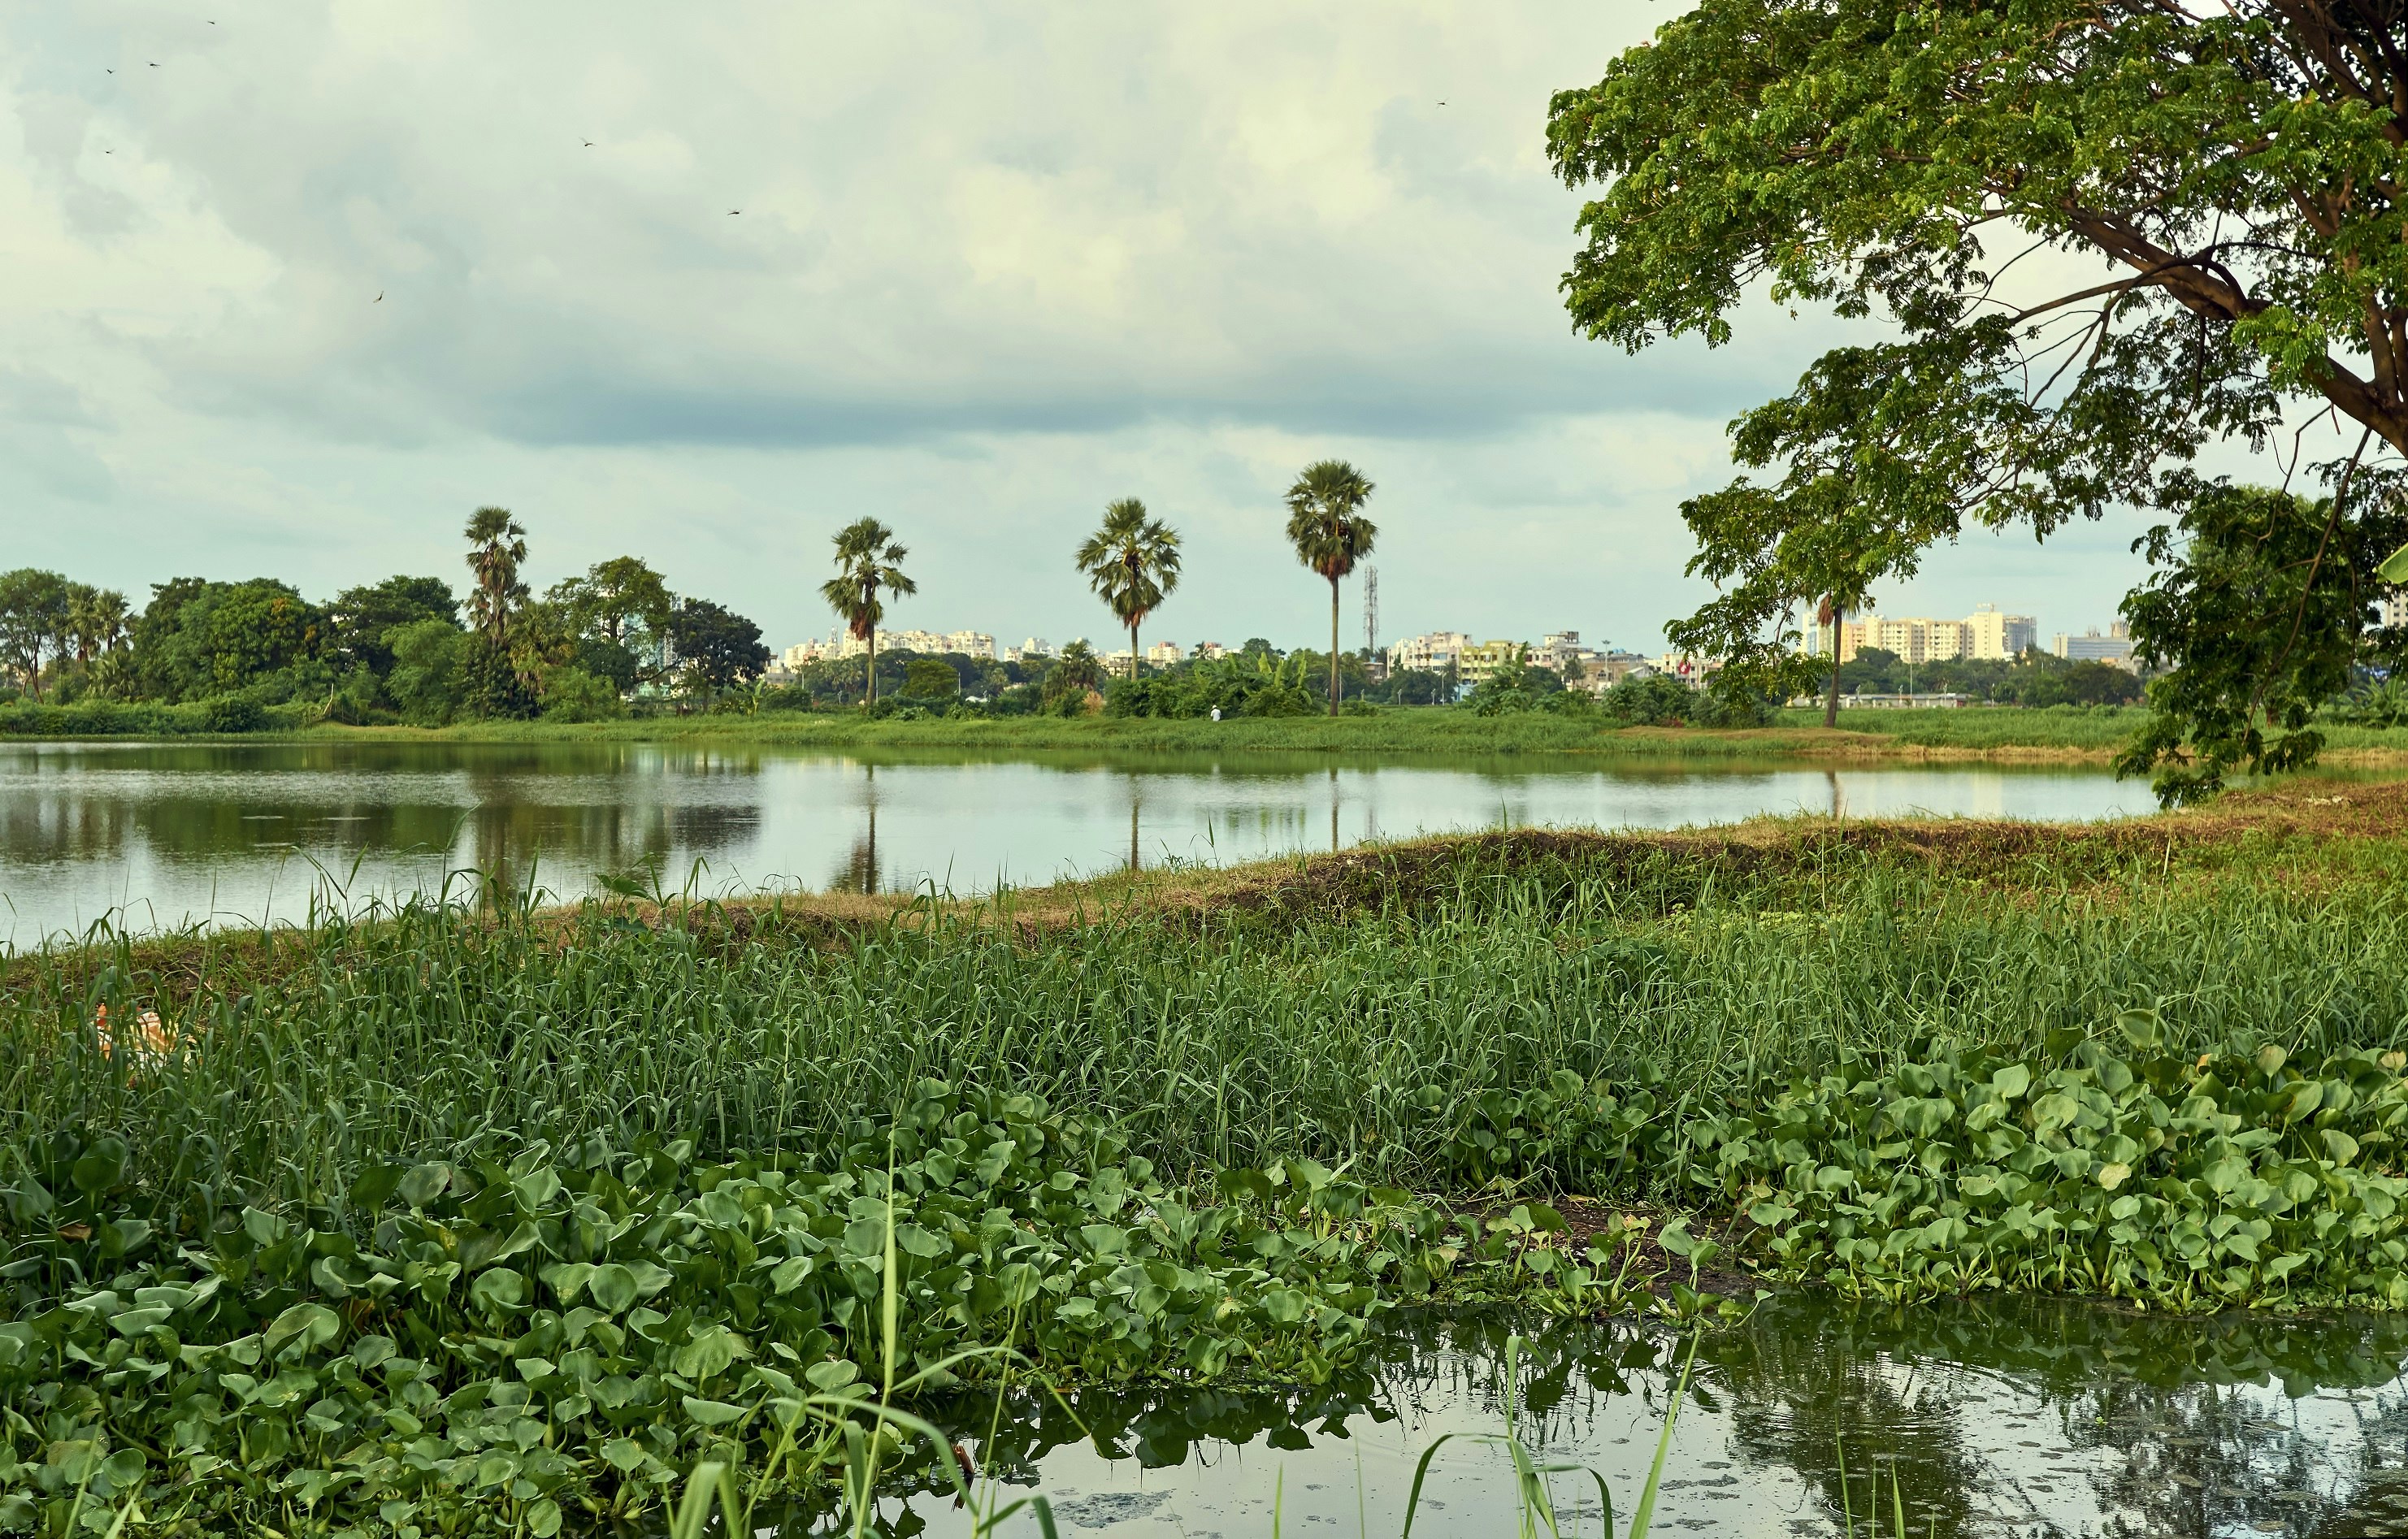 A view of Kolkata's expansive wetlands, which resemble a large pond with greenery growing in and around it. In the distance the skyline of the city of Kolkata is visible.